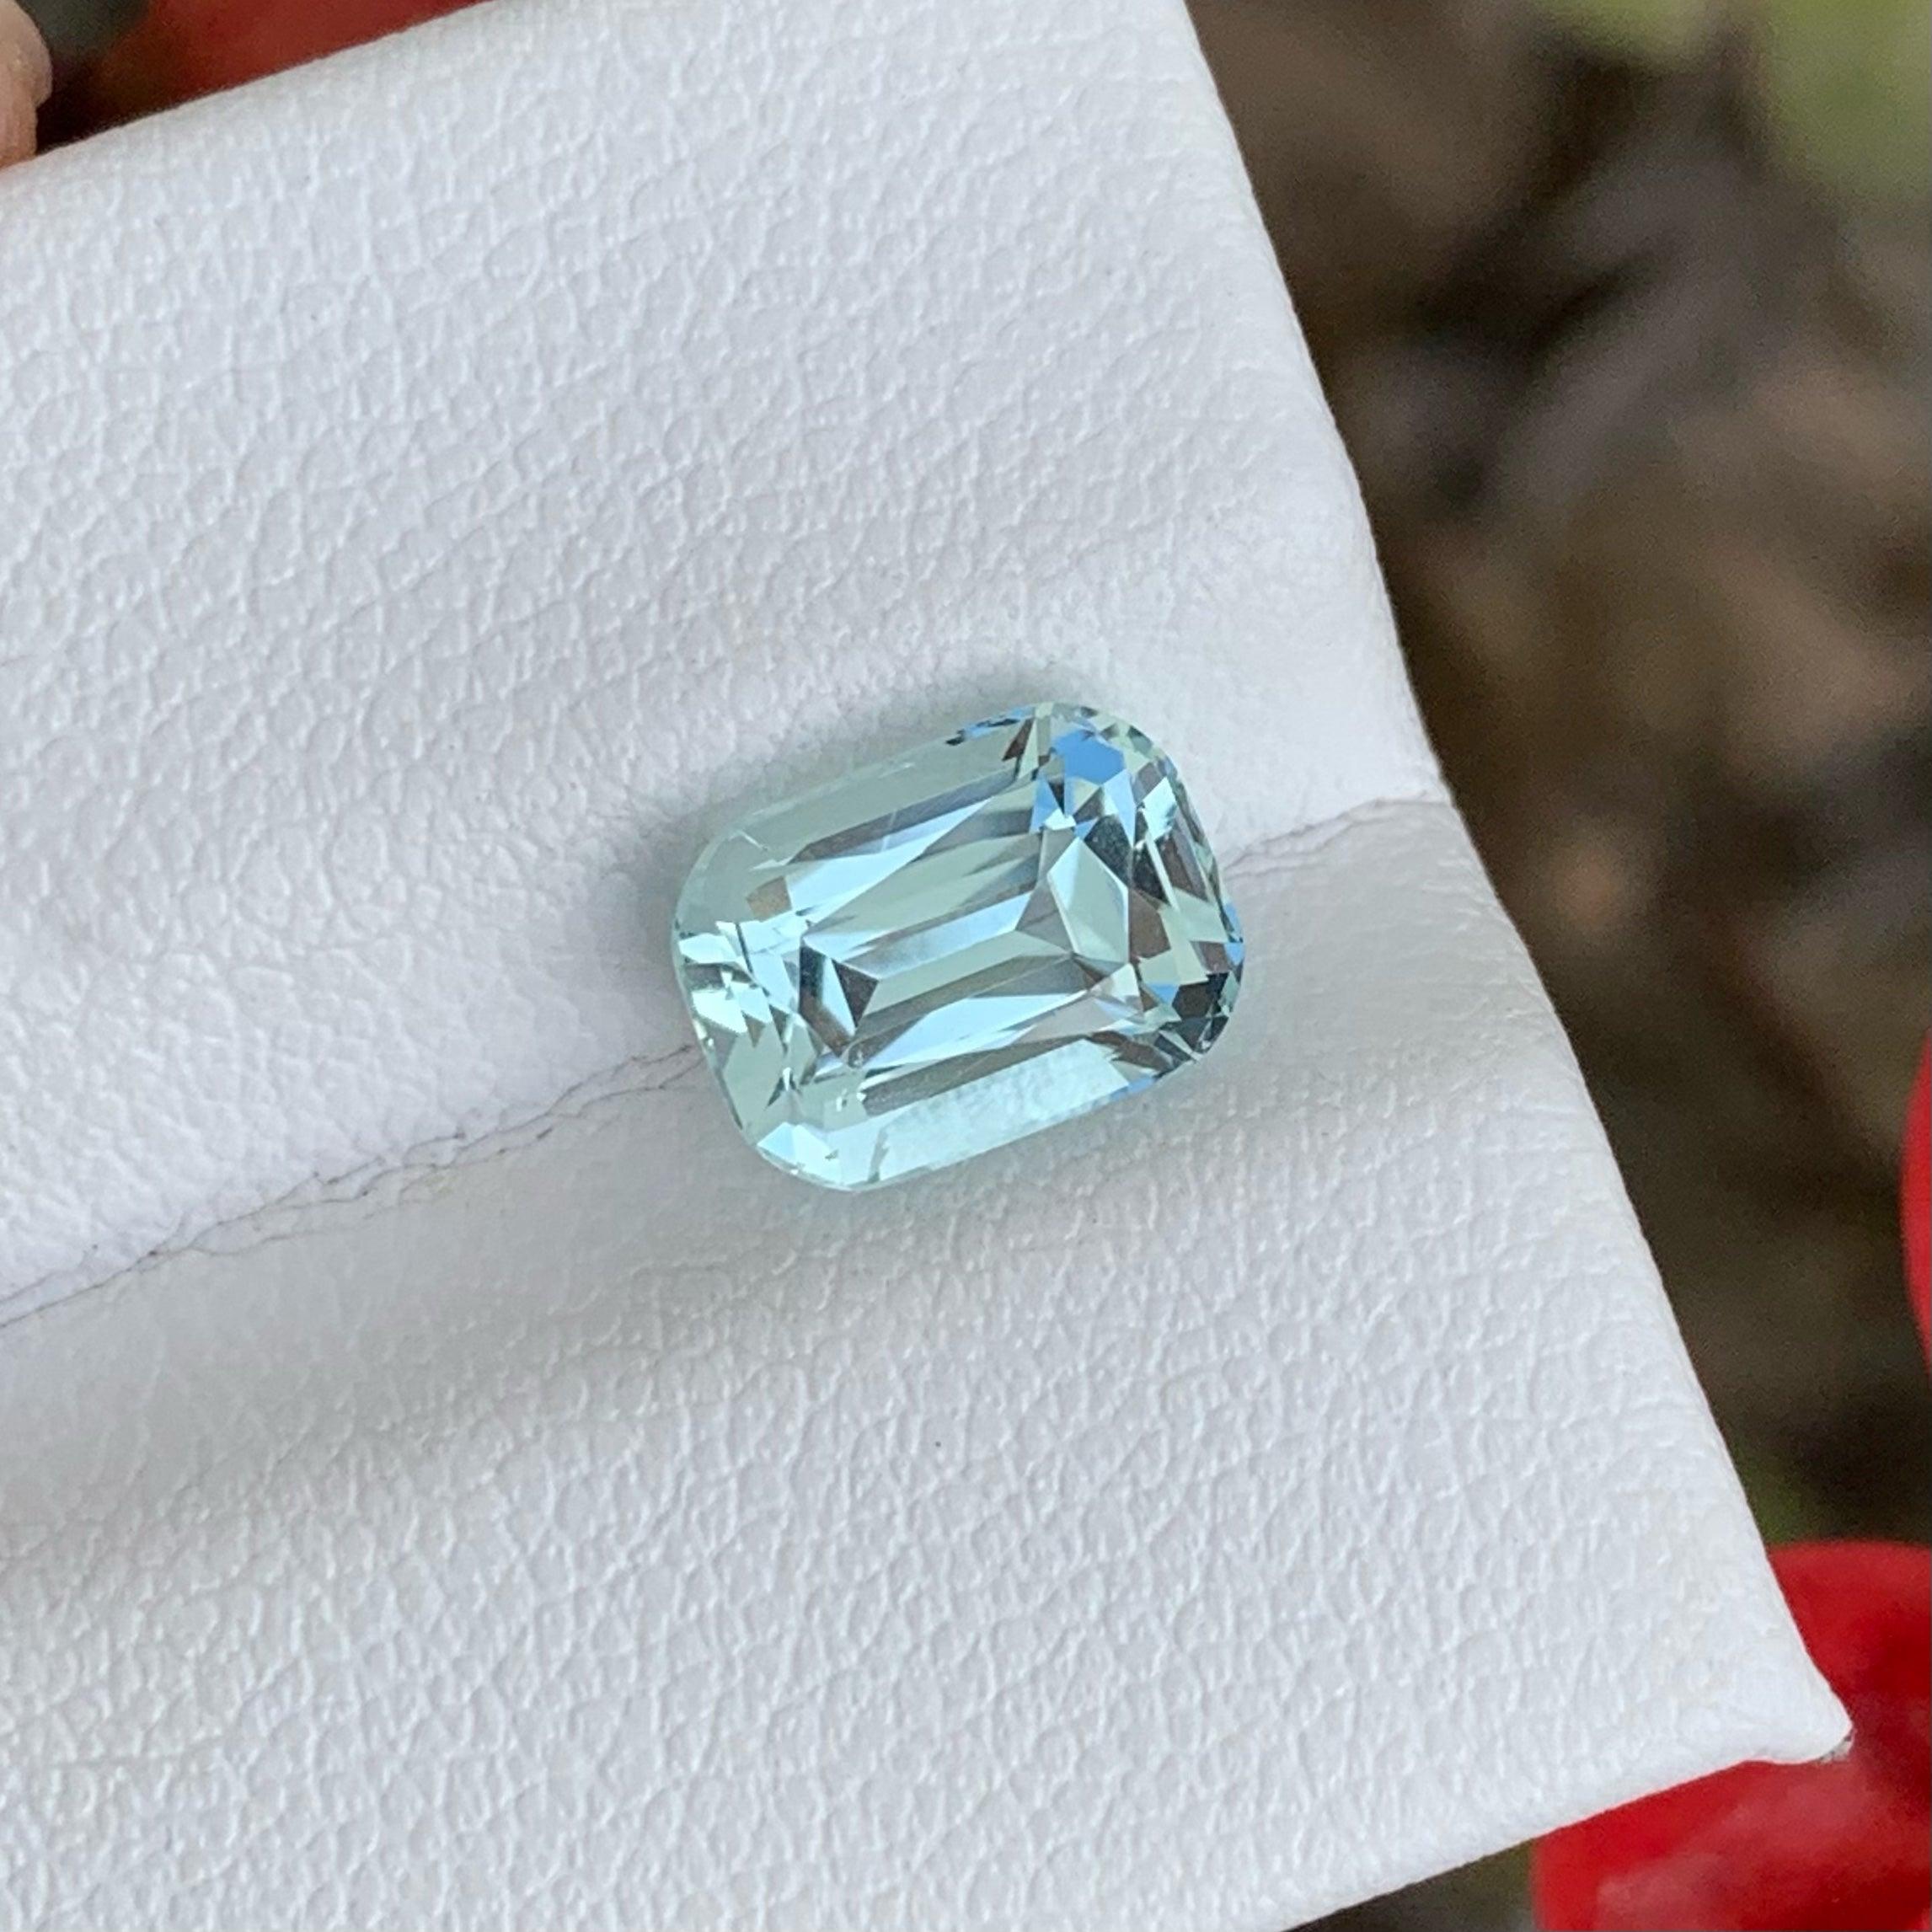 Stunning Light Blue Loose Aquamarine Gem, available for sale at wholesale price natural high quality 2.05 Carats Eye Clean Clarity Loose Aquamarine from Pakistan.

Product Information:
GEMSTONE NAME: Stunning Light Blue Loose Aquamarine